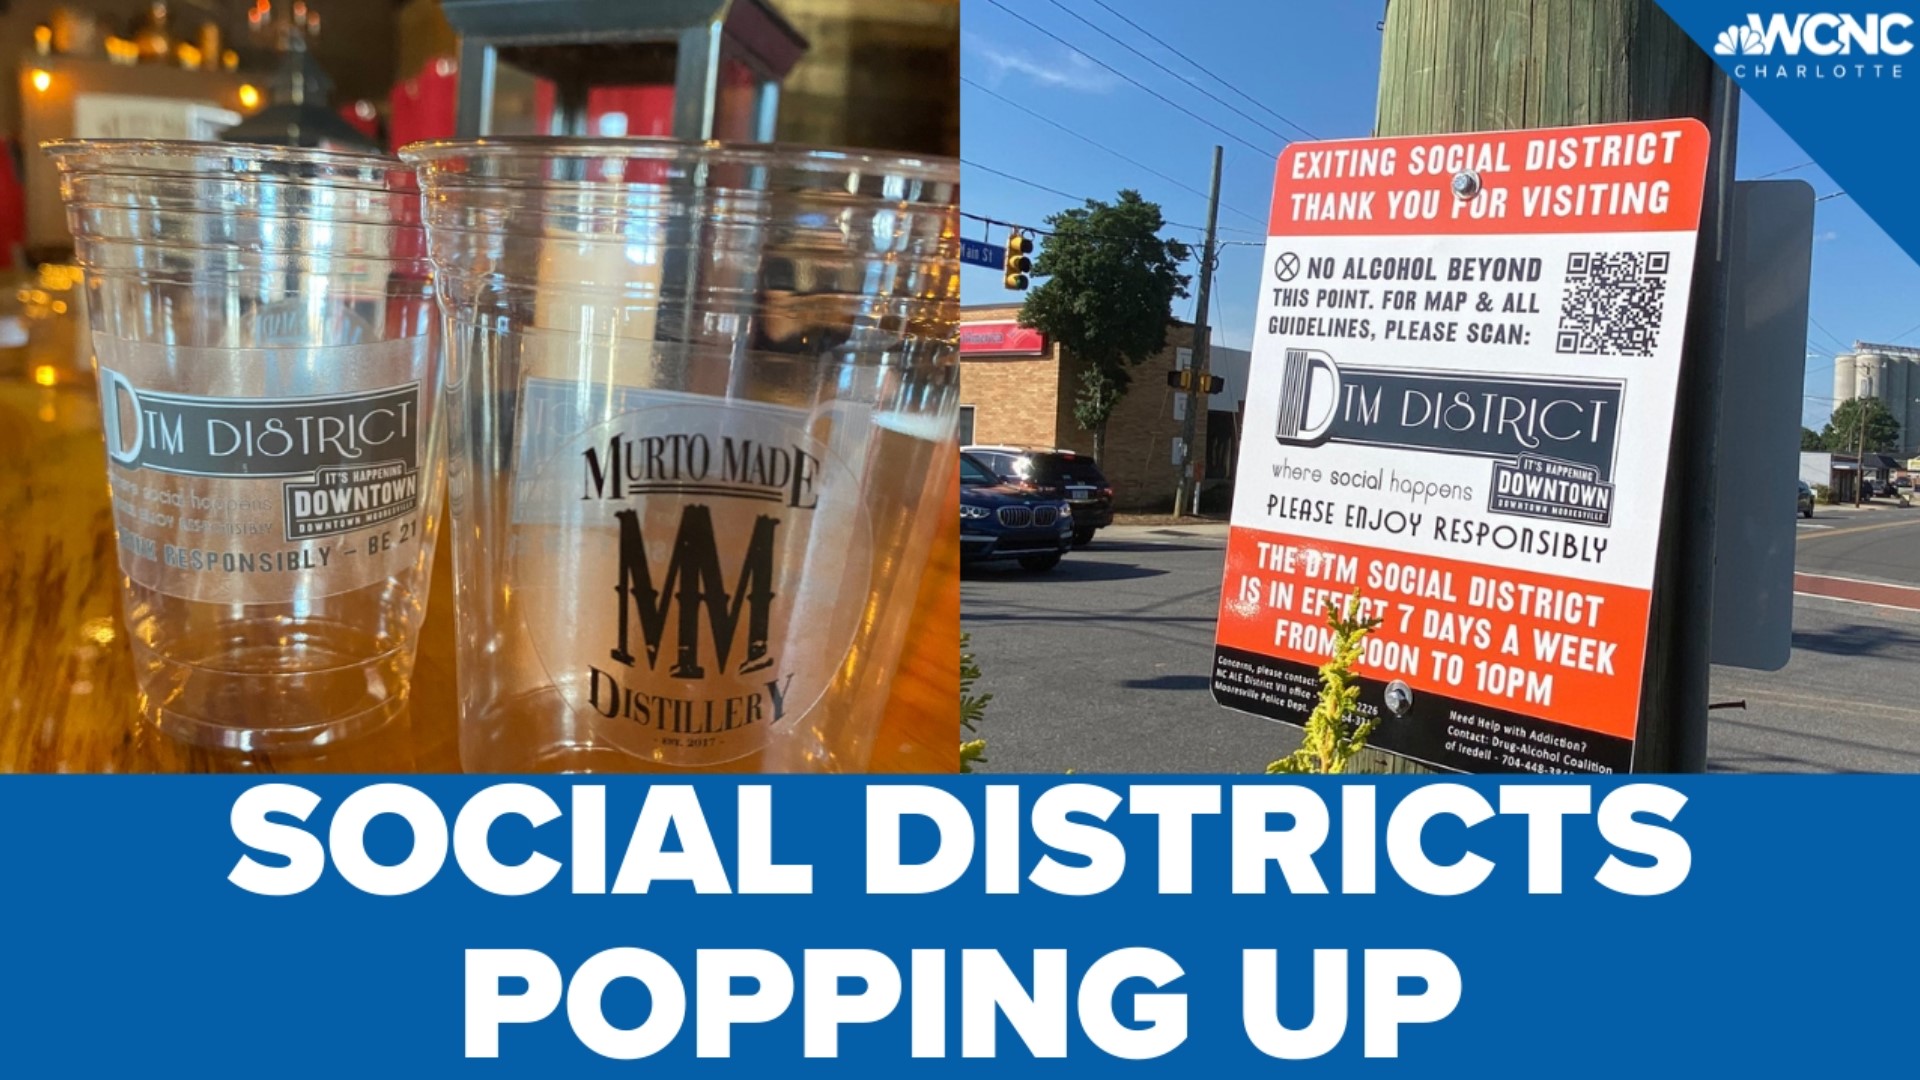 While Charlotte’s plans for social districts are on pause for now, Mooresville and Salisbury are some of the latest to launch open-container areas downtown.